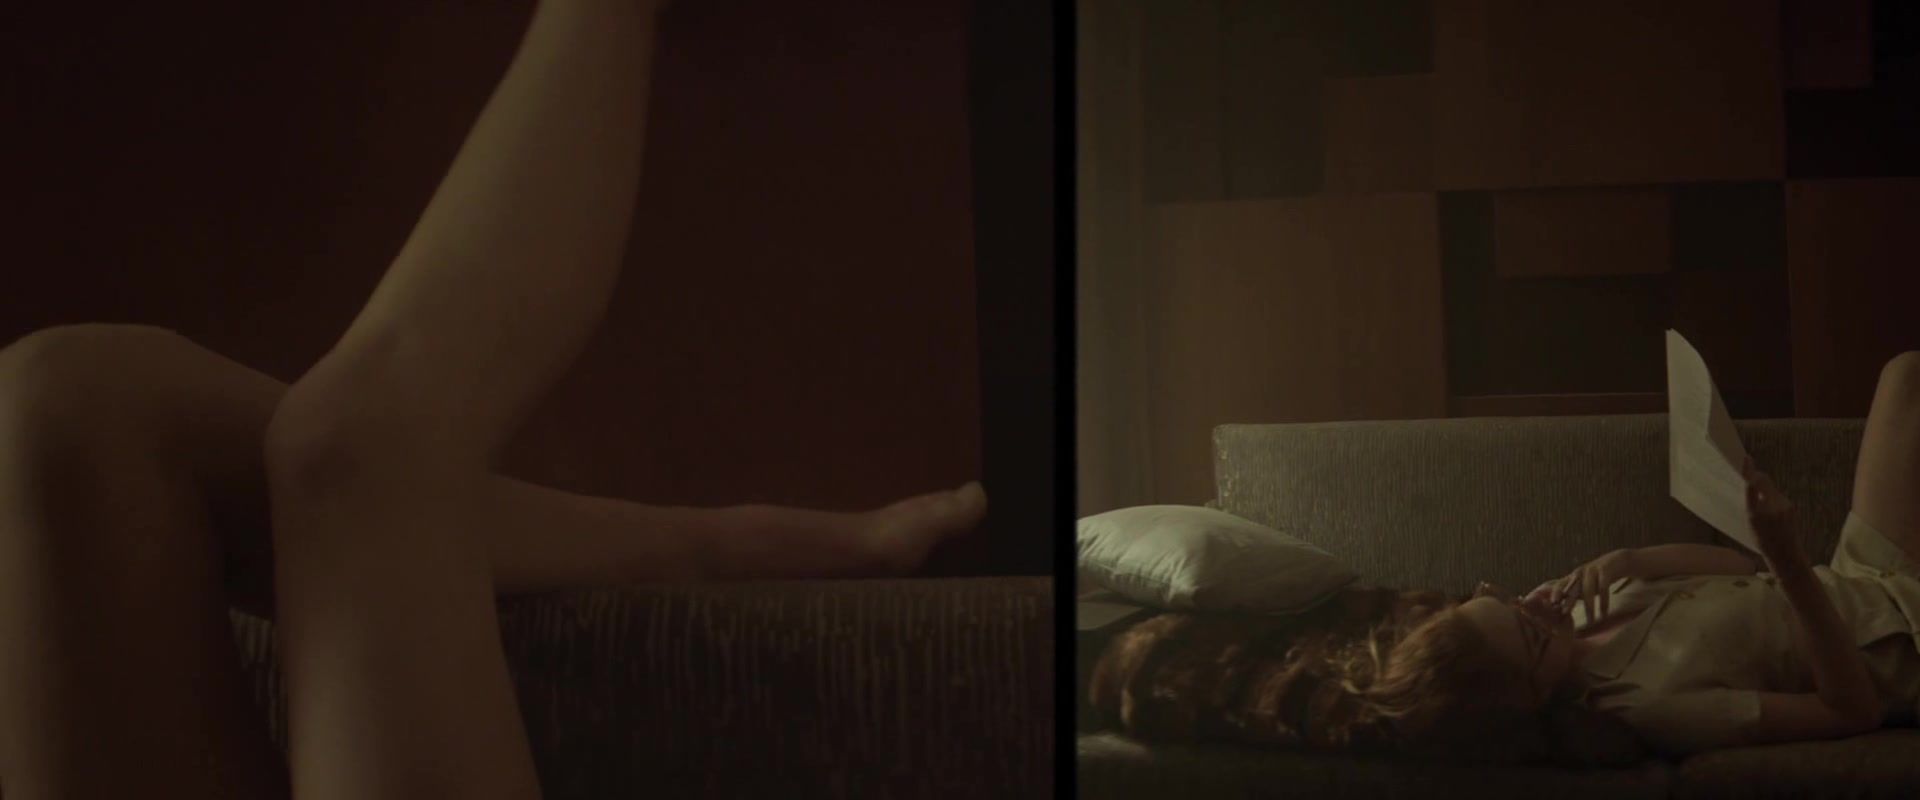 Busty Naked Freya Mavor, Stacy Martin - The Lady In The Car With Glasses & A Gun (2015) (Sex, Topless Scenes) Tit - 1